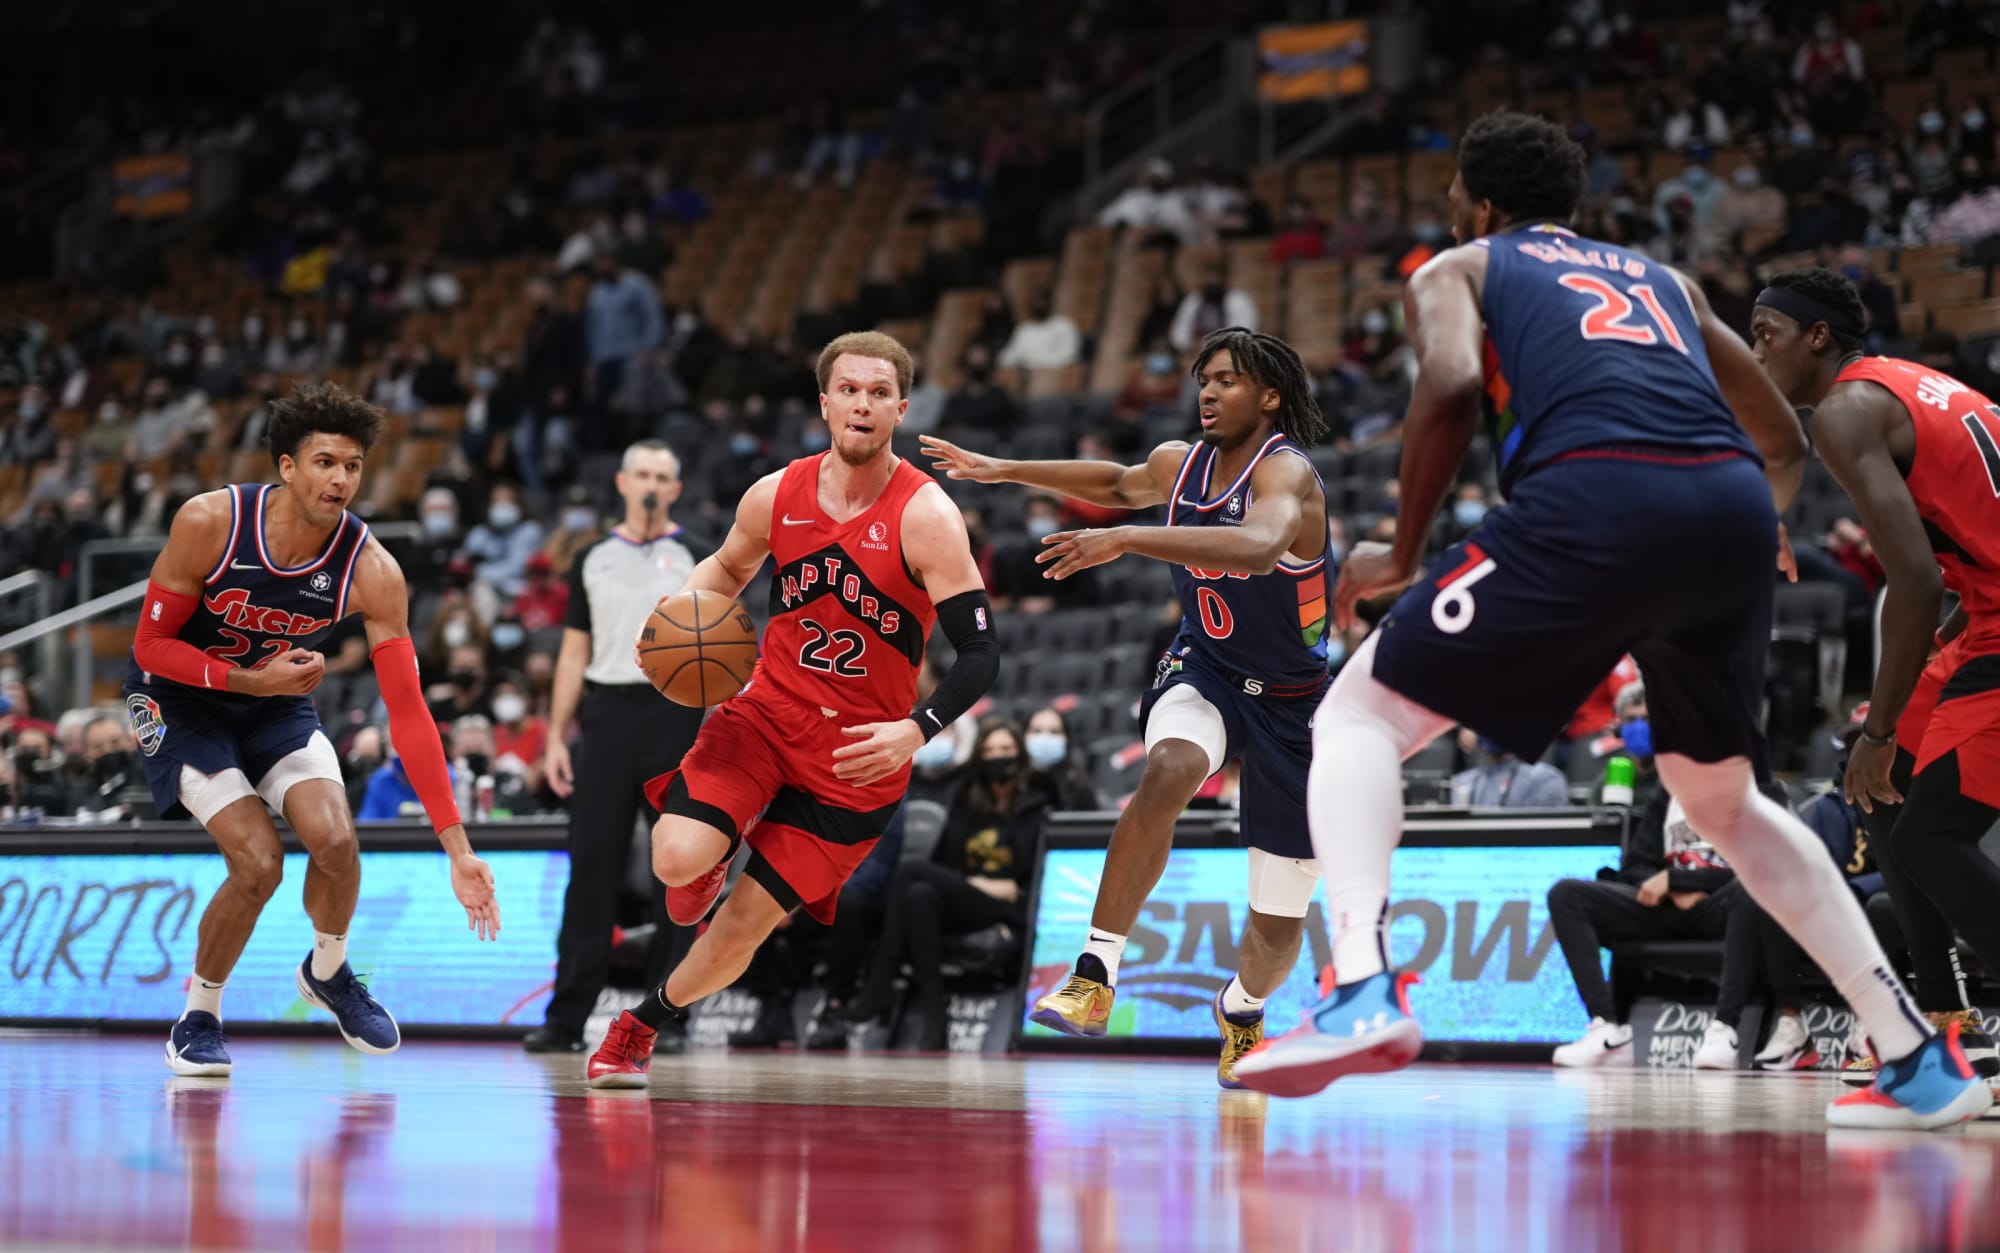 Malachi Flynn struggling with Raptors 905 in G league is concerning